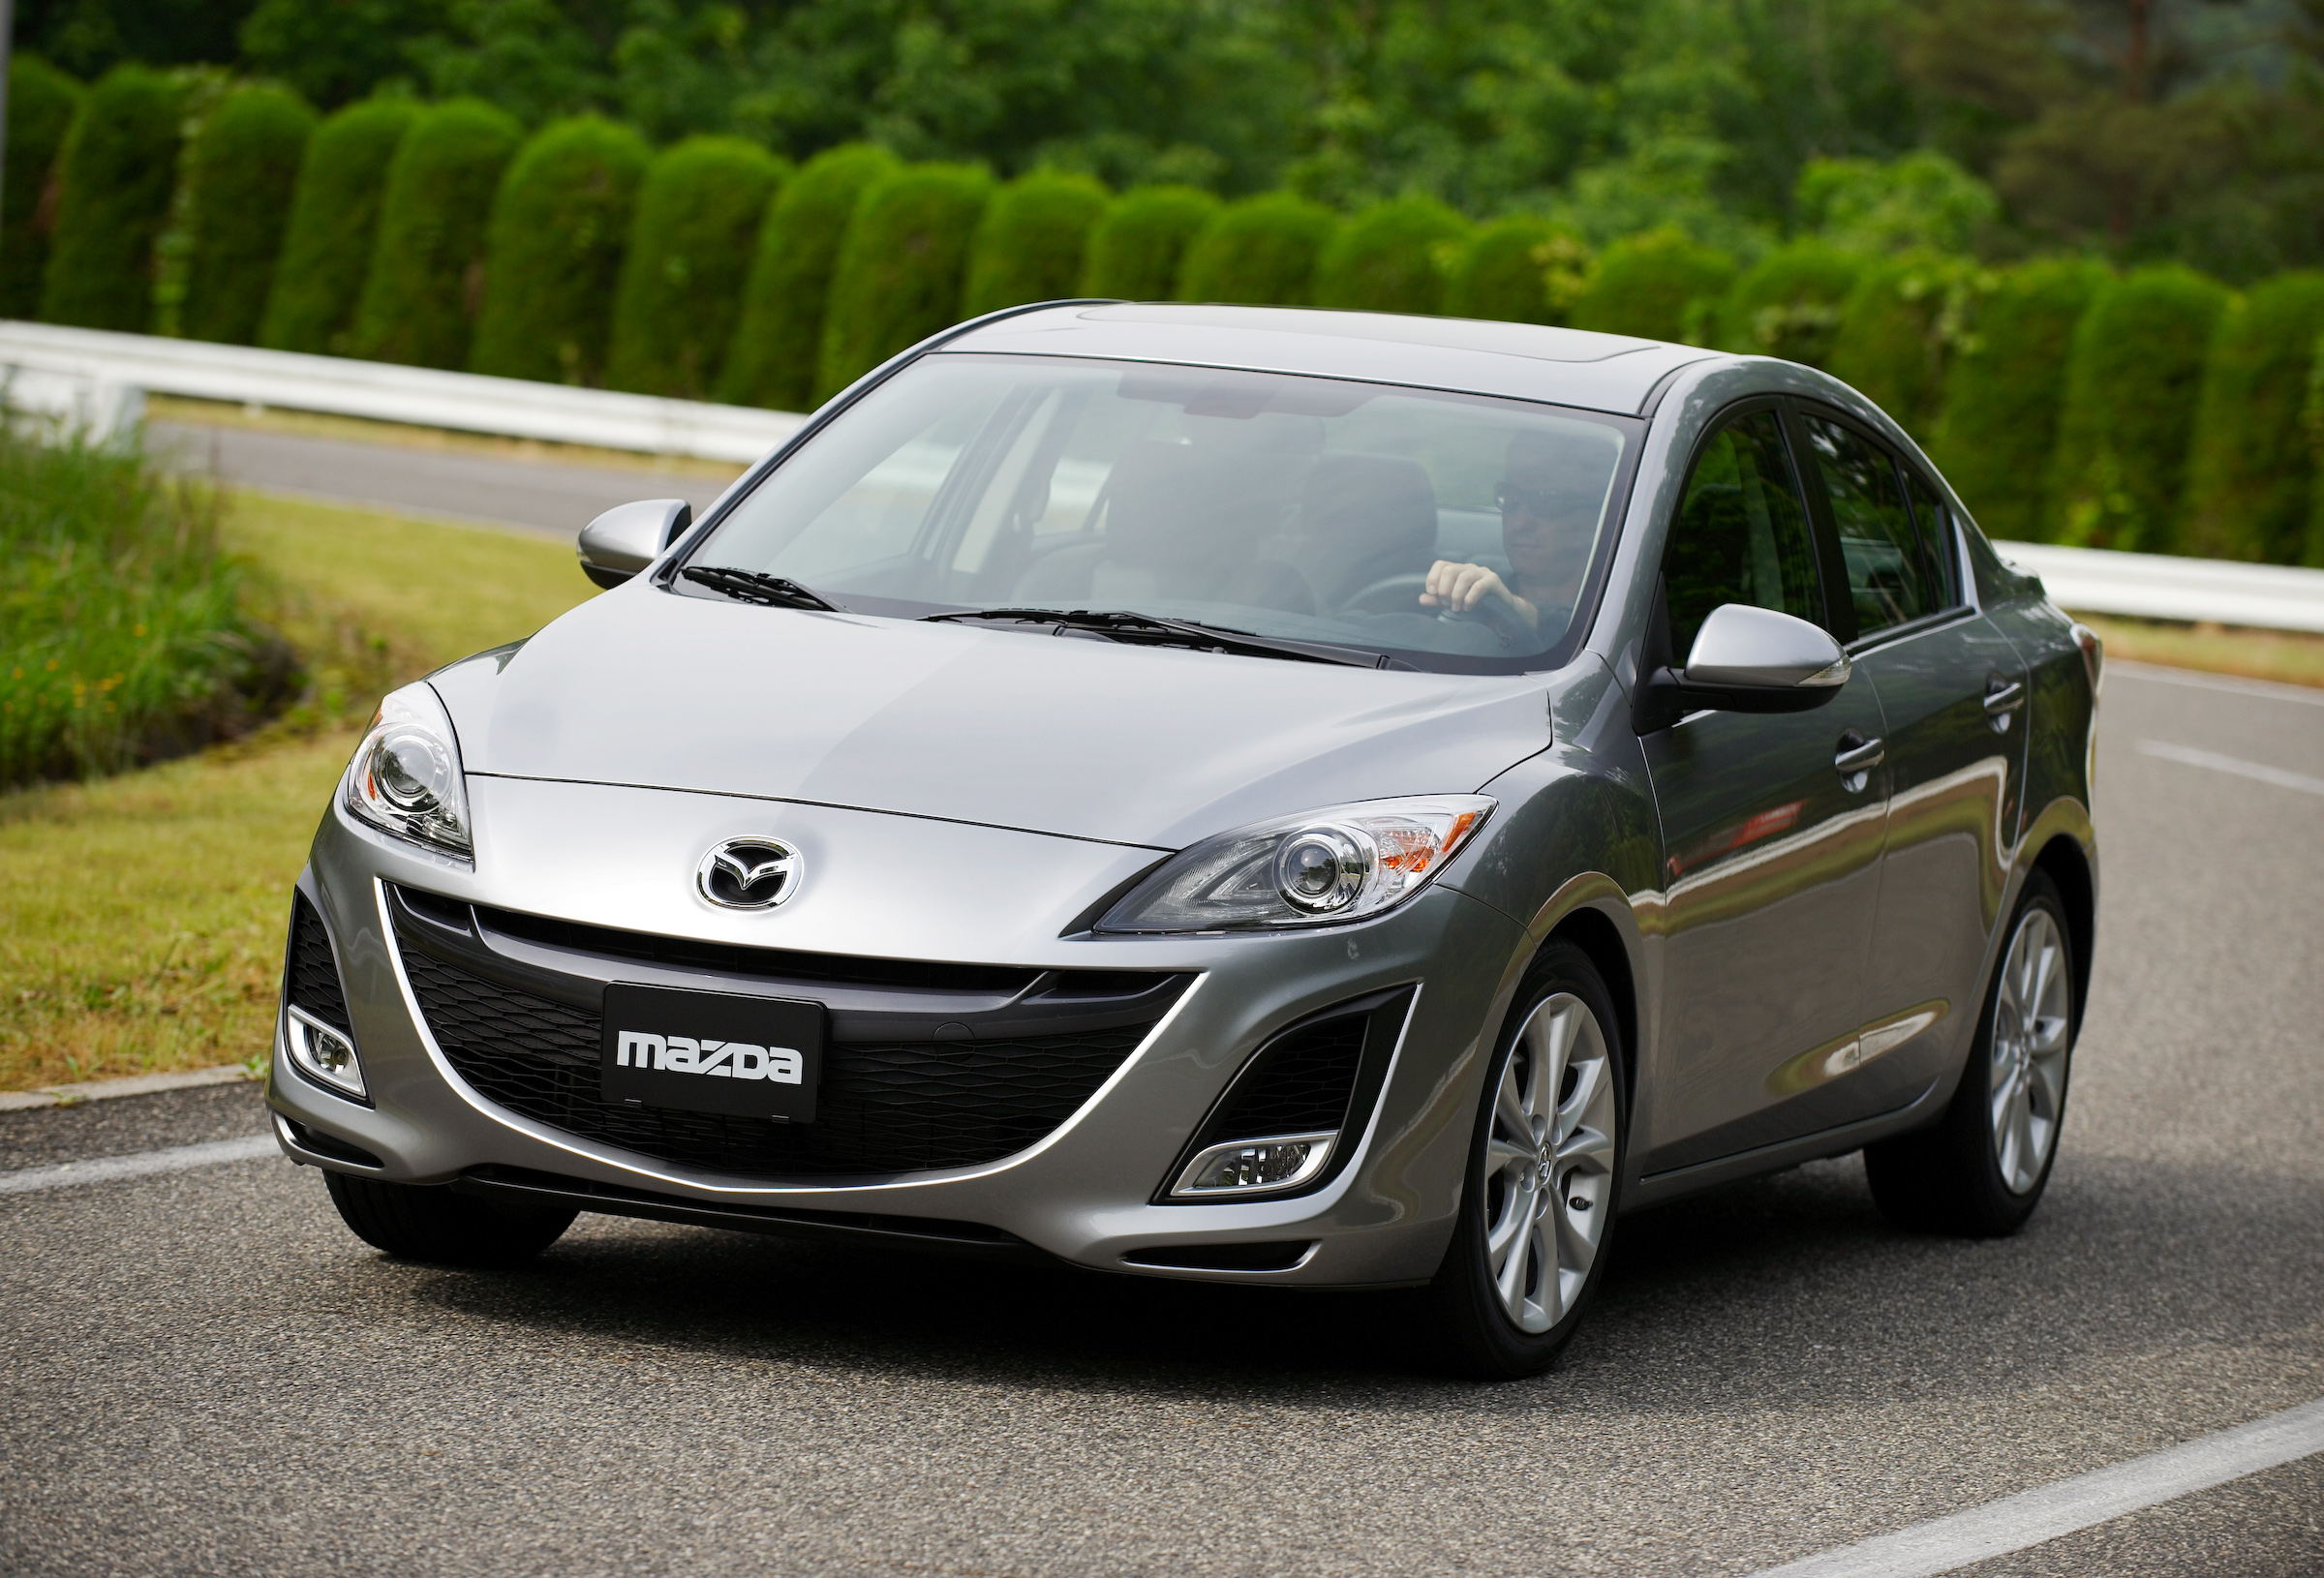 A silver Mazda3 subcompact car shot from the front 3/4